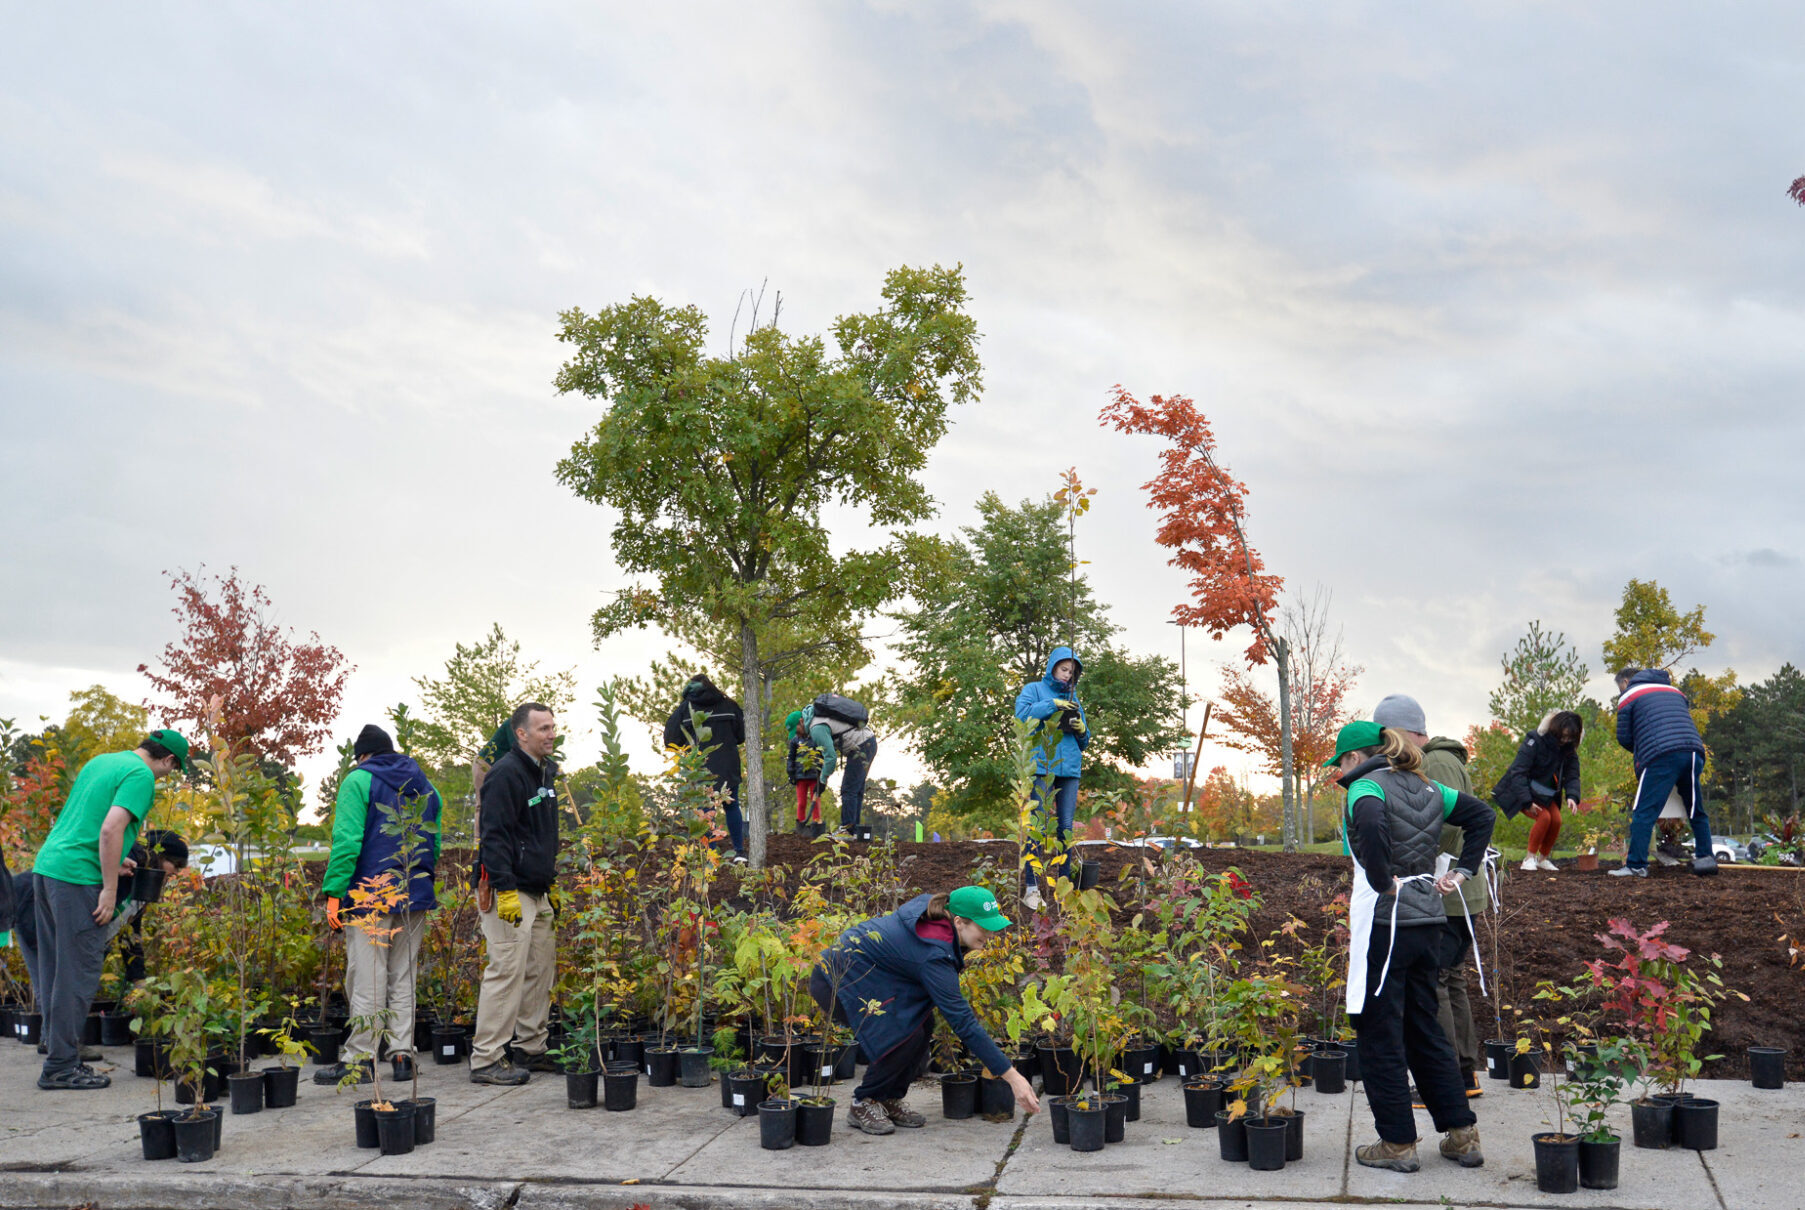 People engaged in planting a mini forest at Toronto Zoo